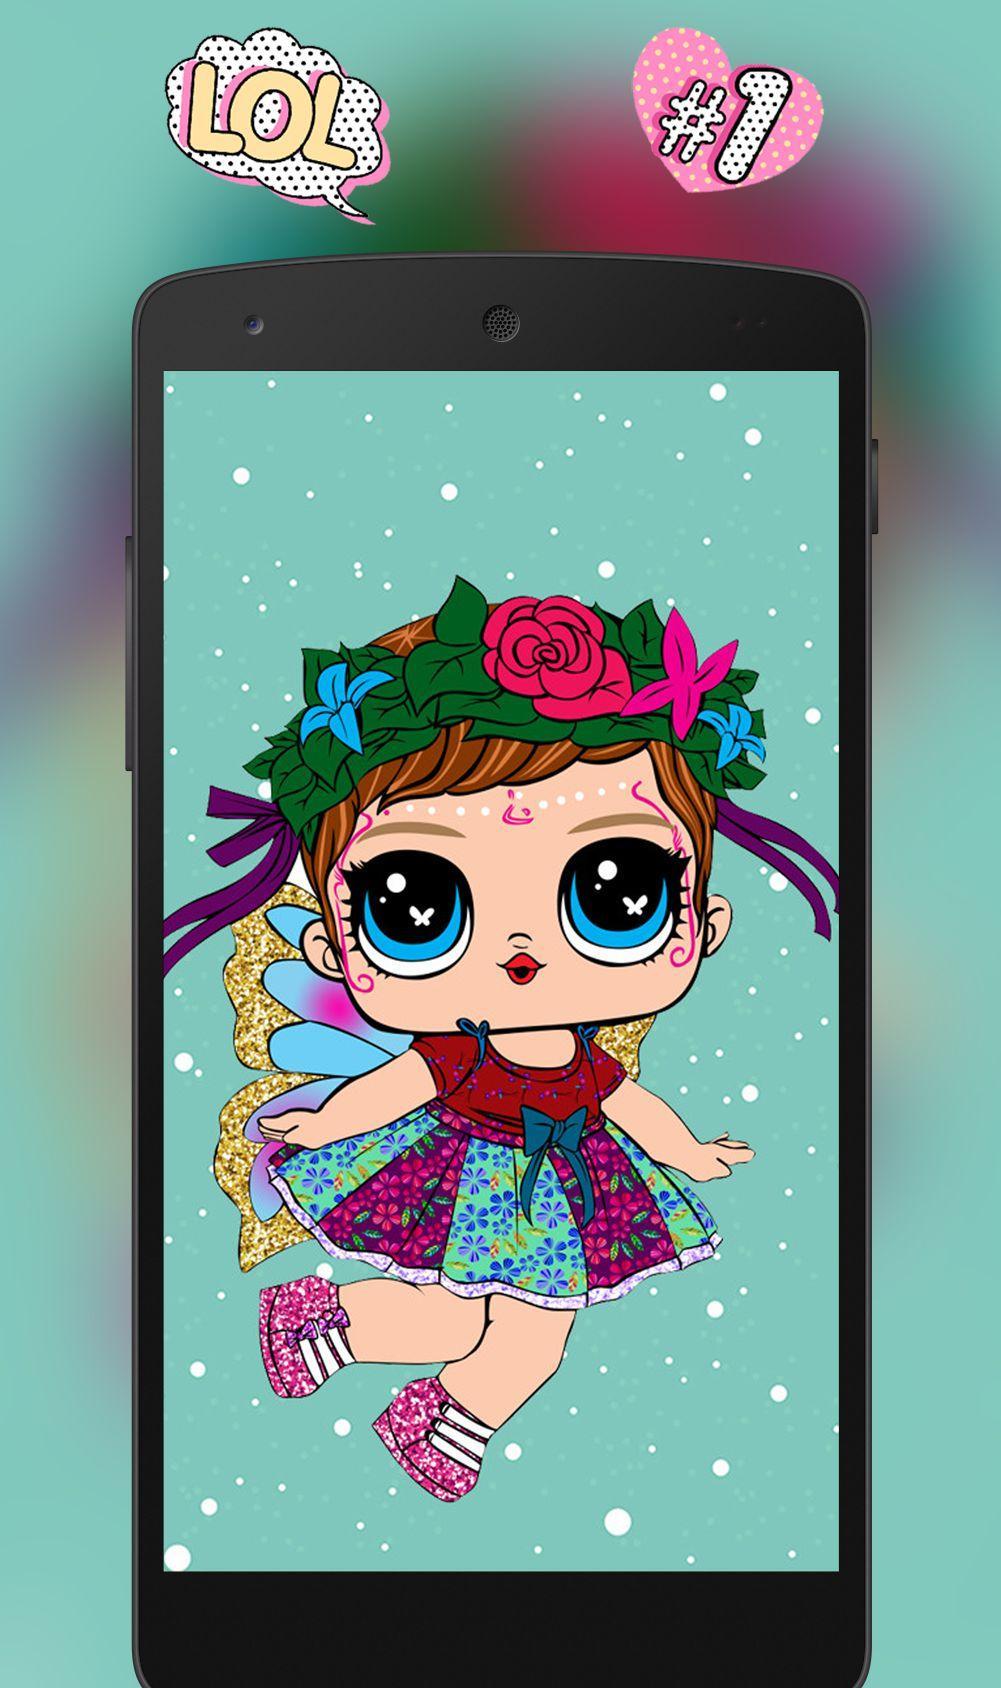 cute surprise lol dolls wallpaper for Android - APK Download